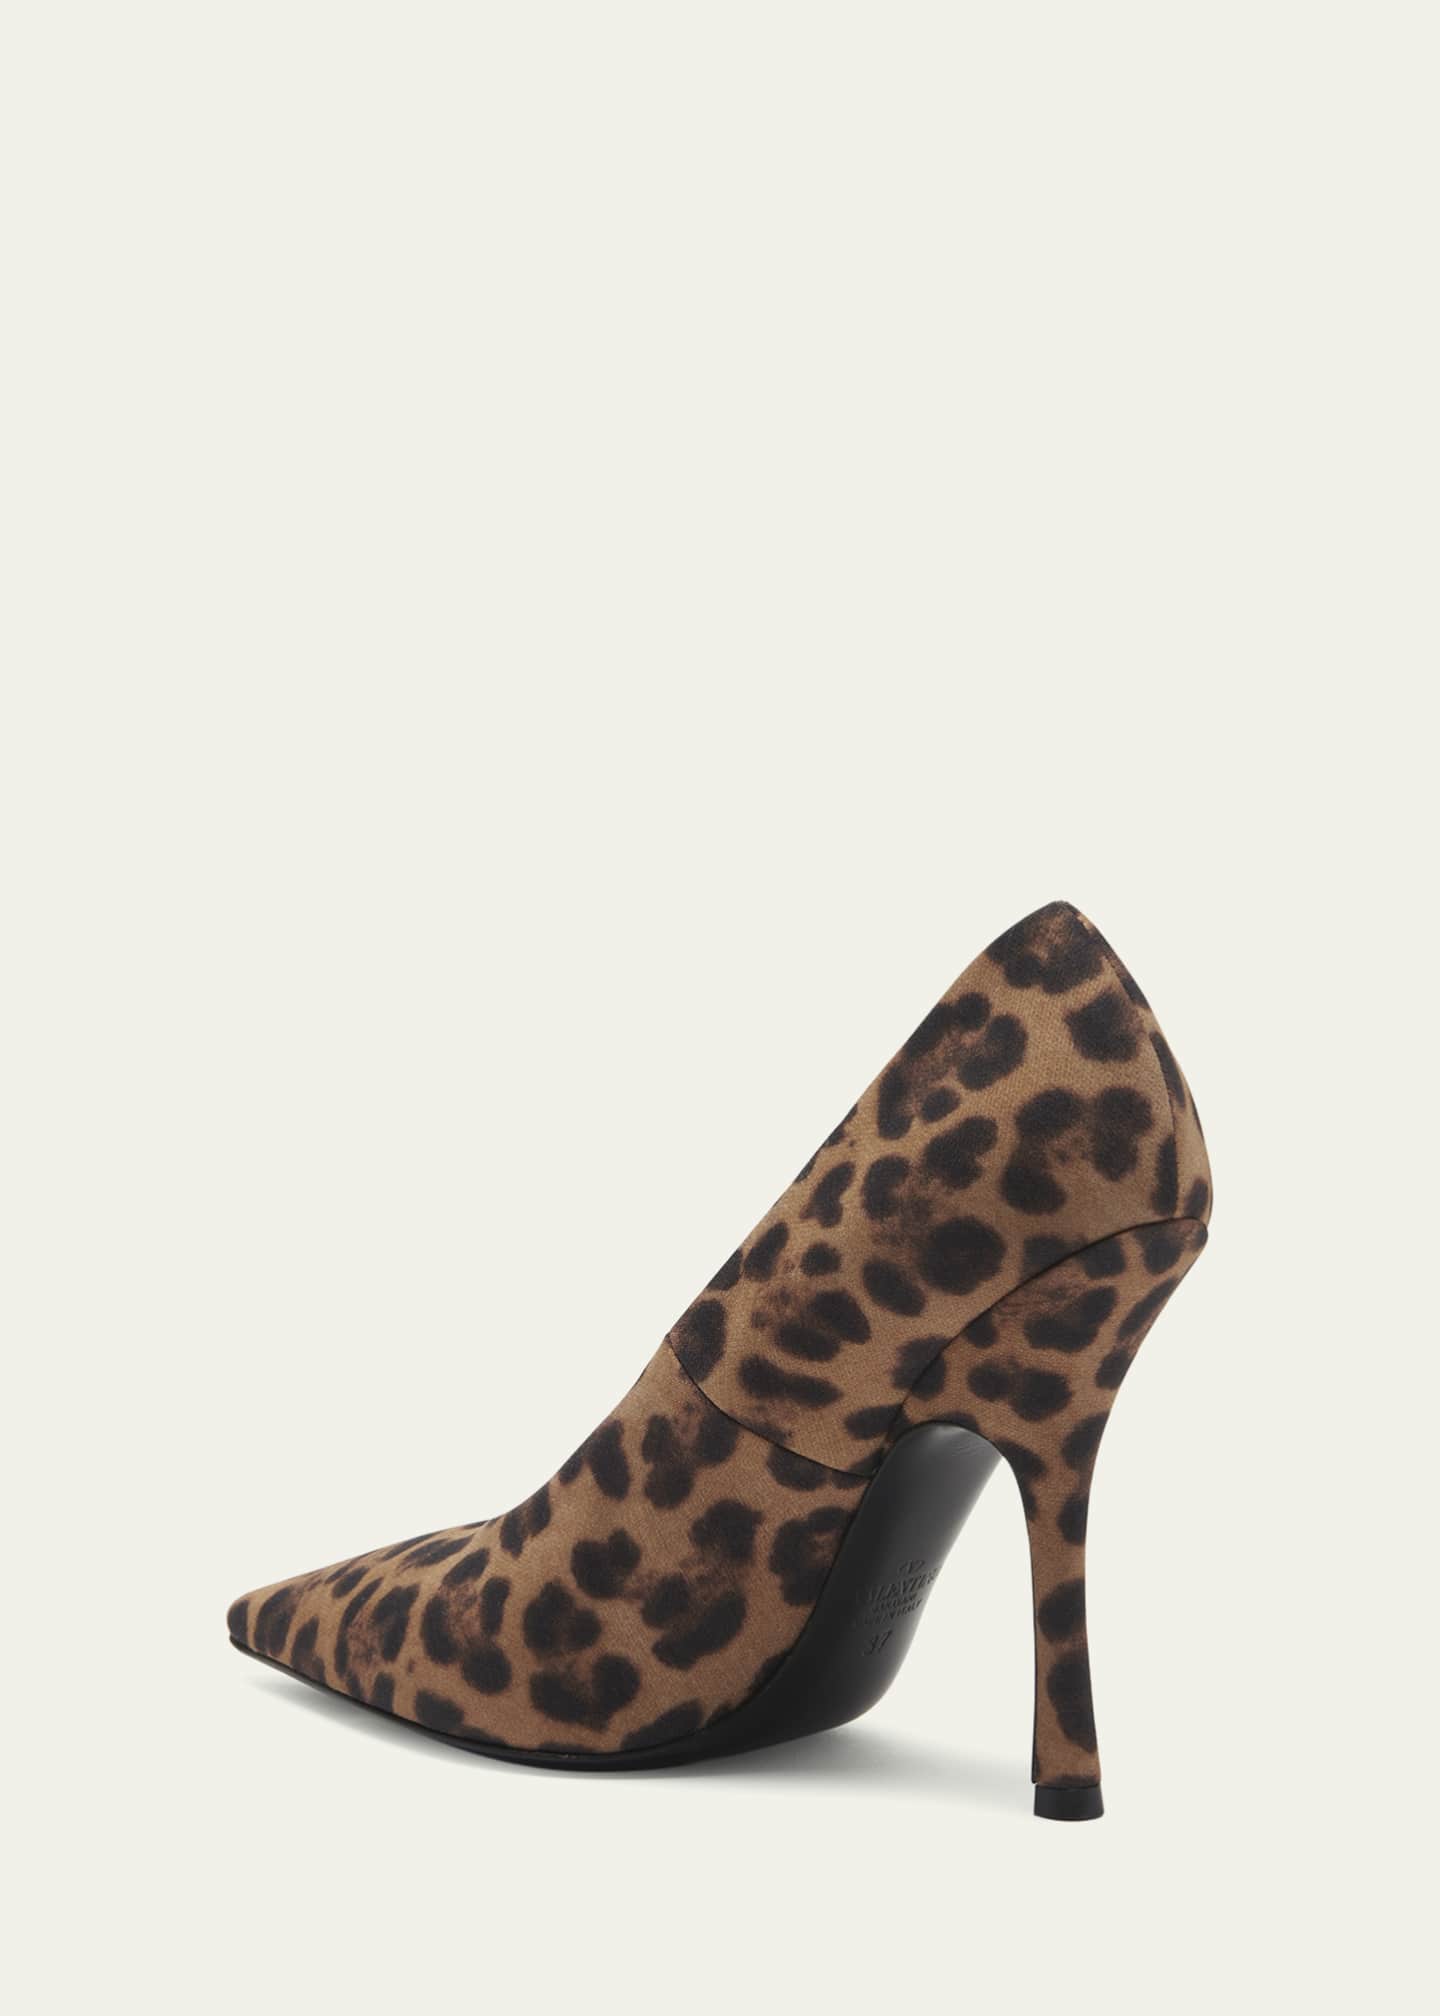 The Perfect Leopard Print Pumps - Loverly Grey